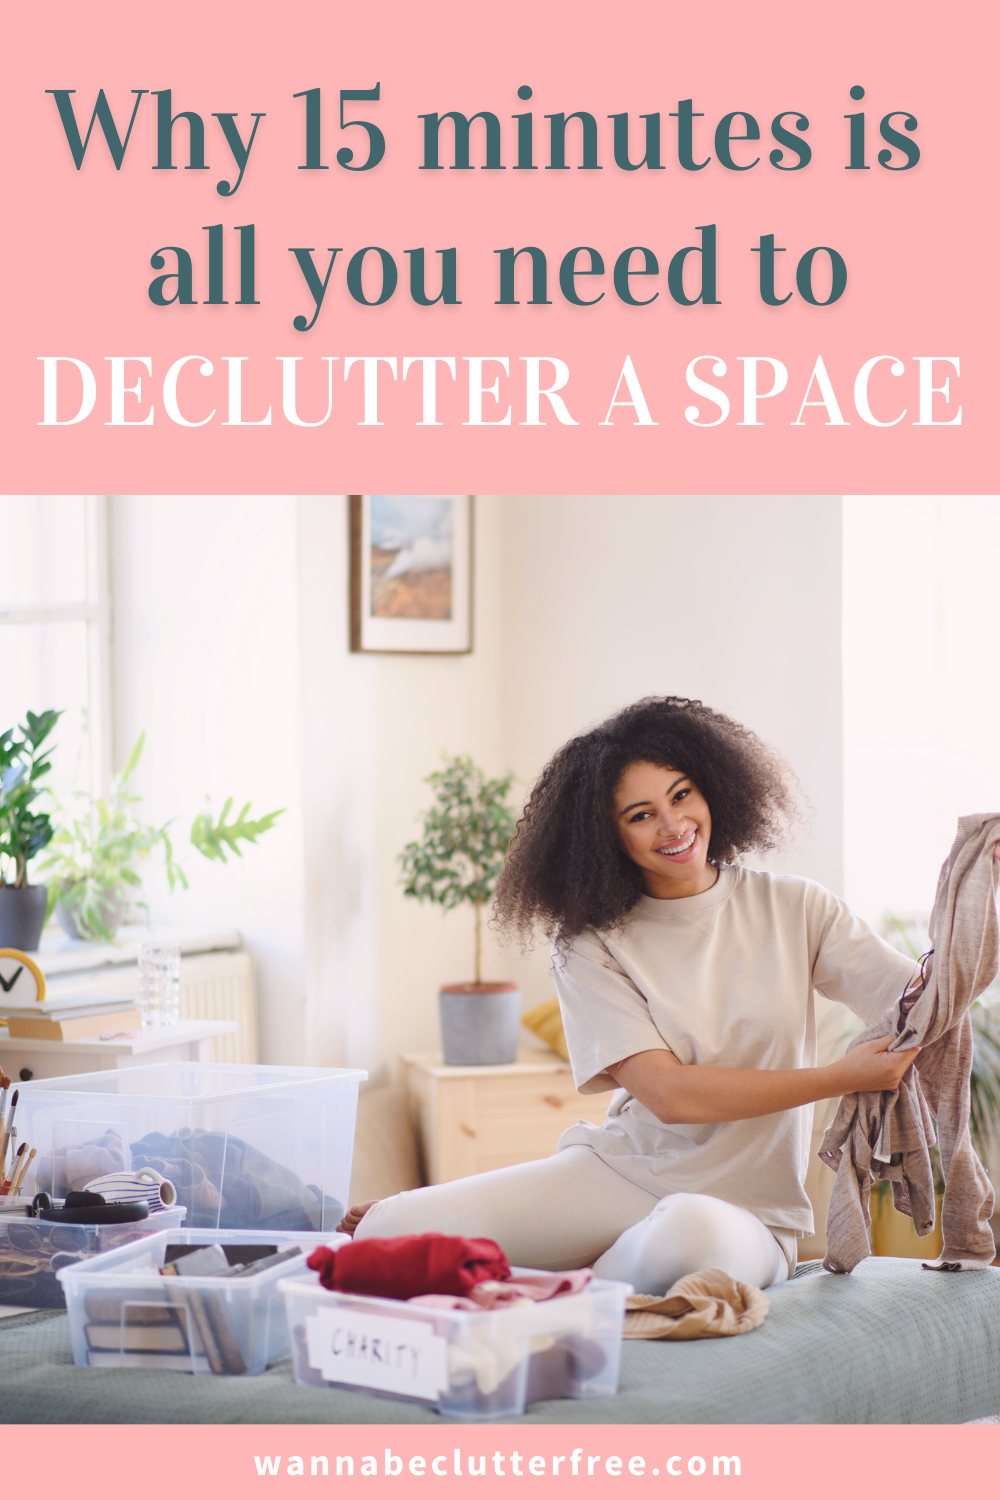 Why 15 minutes is all you need to declutter a space